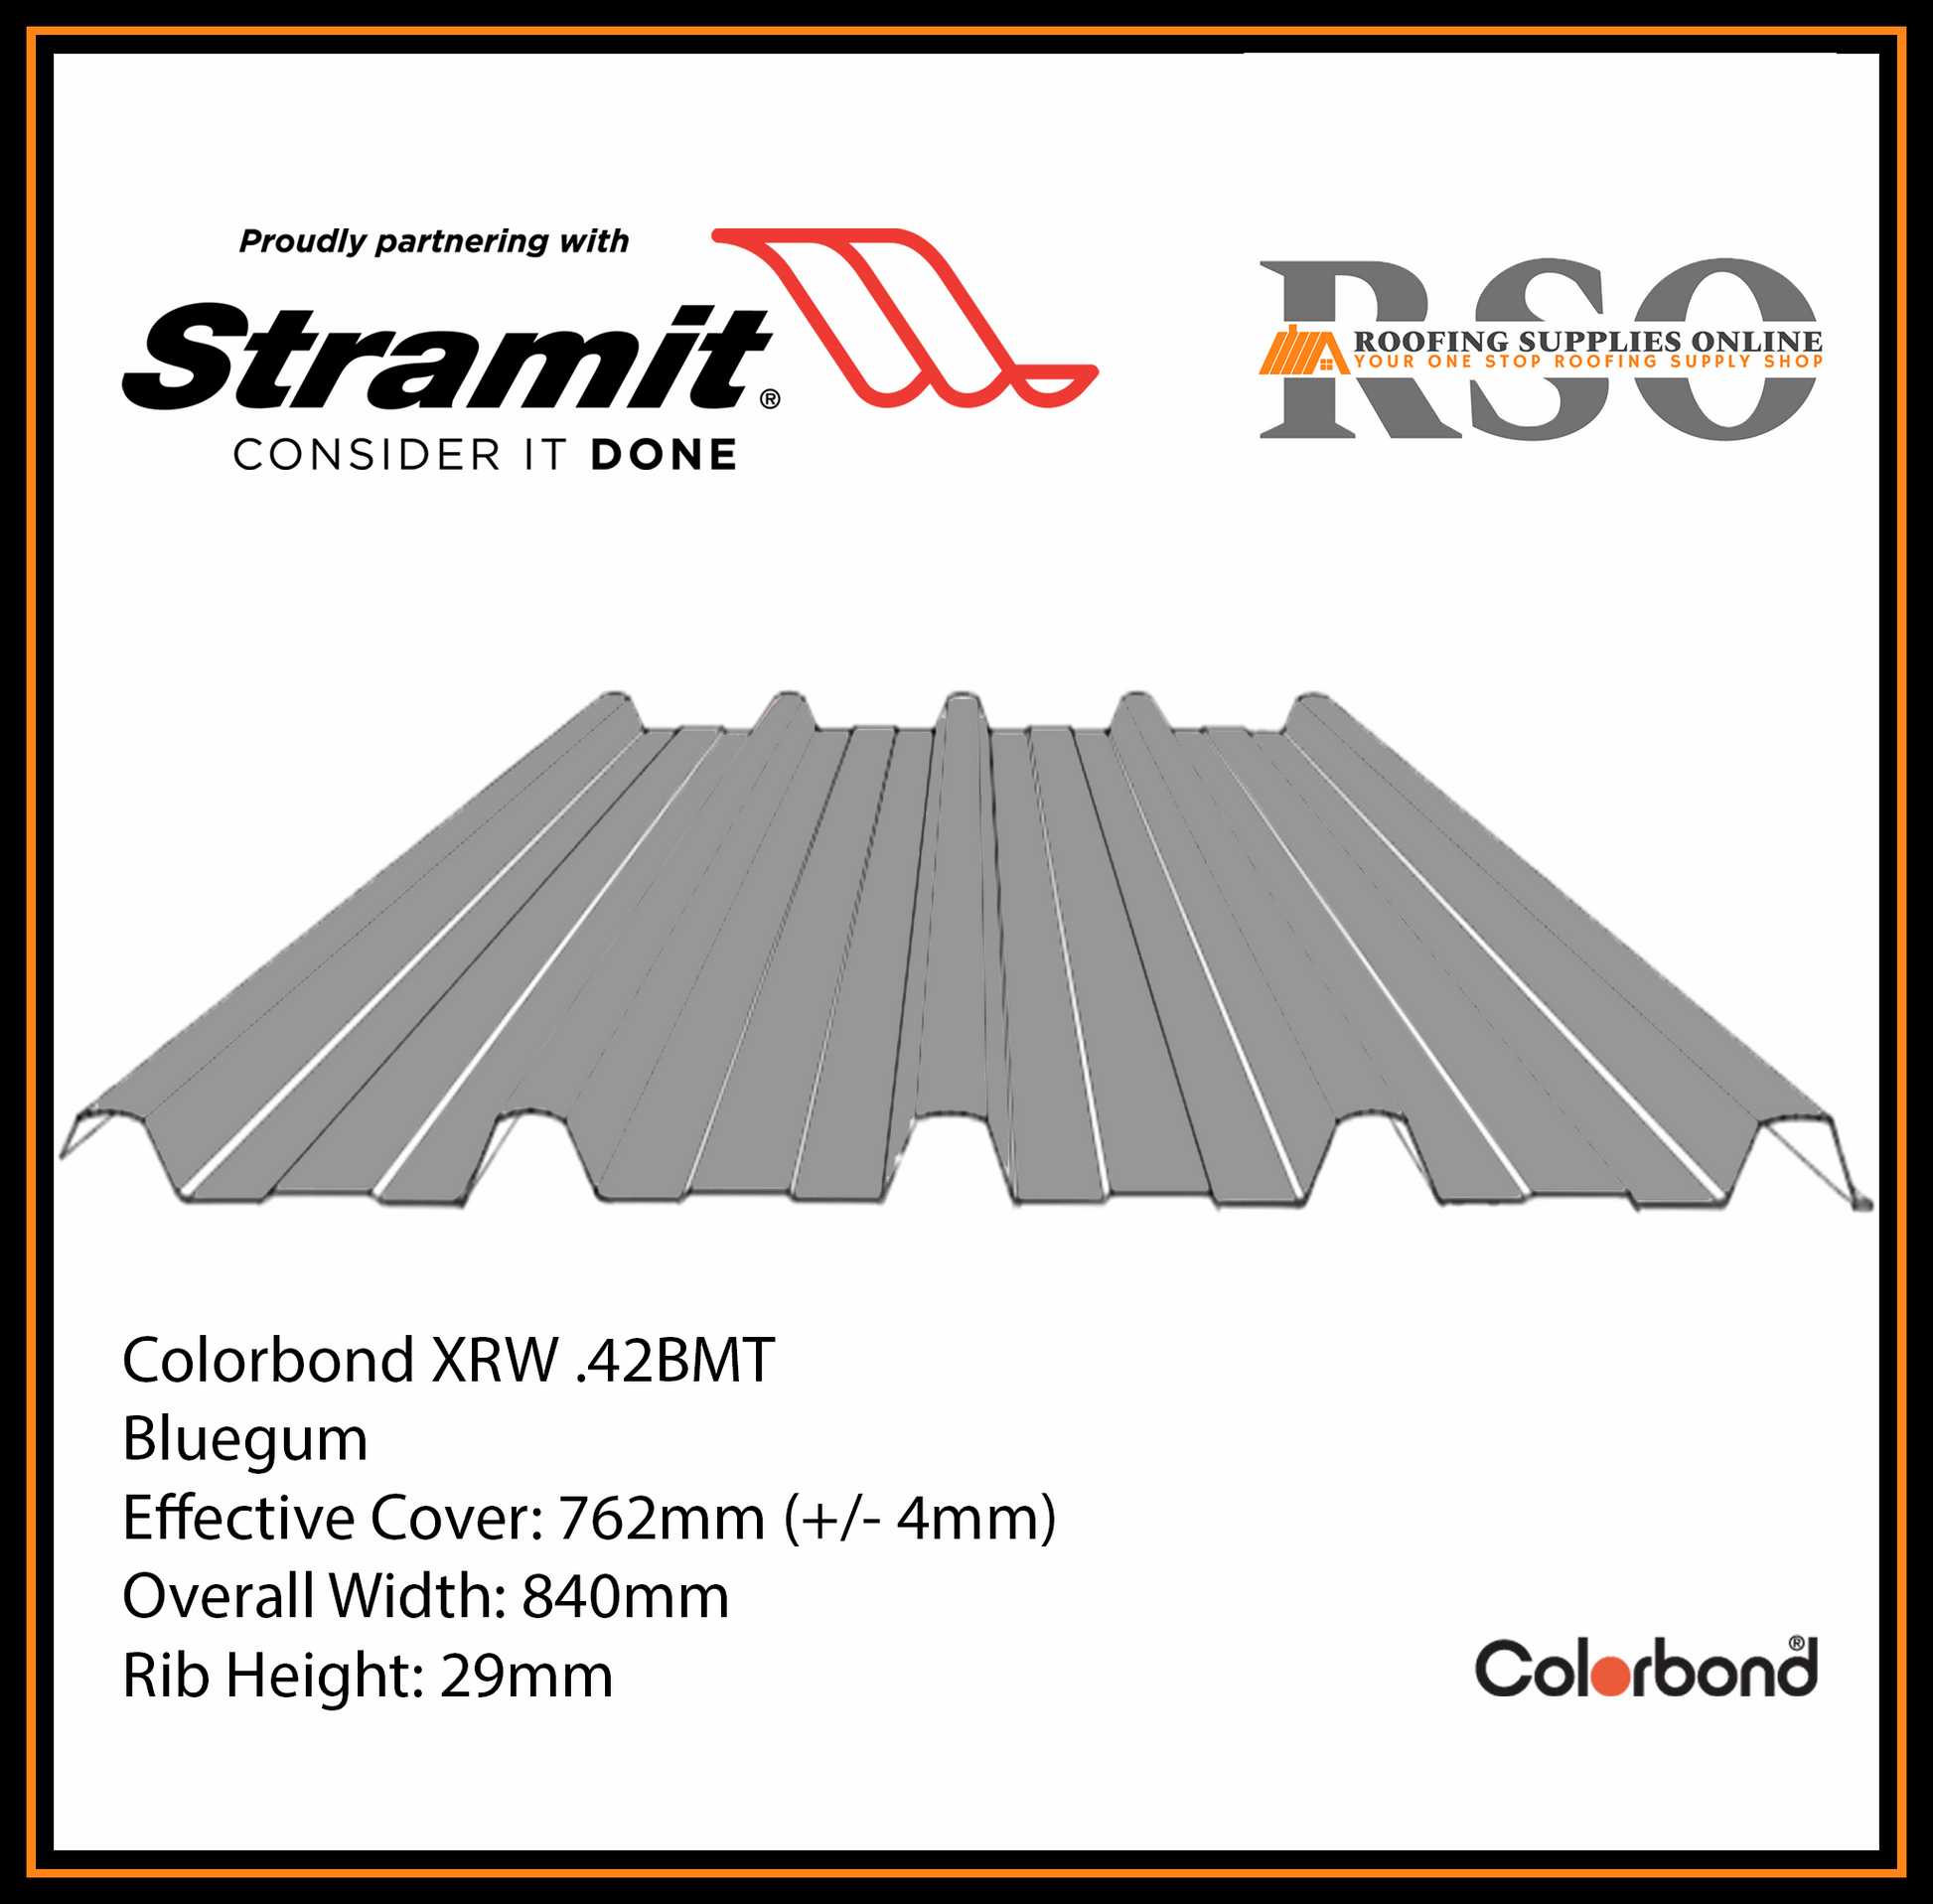 This is an illustration of a Monoclad profile roof sheet which is also known as 5 Rib or Trimdek profile. This Roof sheet's colour is called Bluegum.